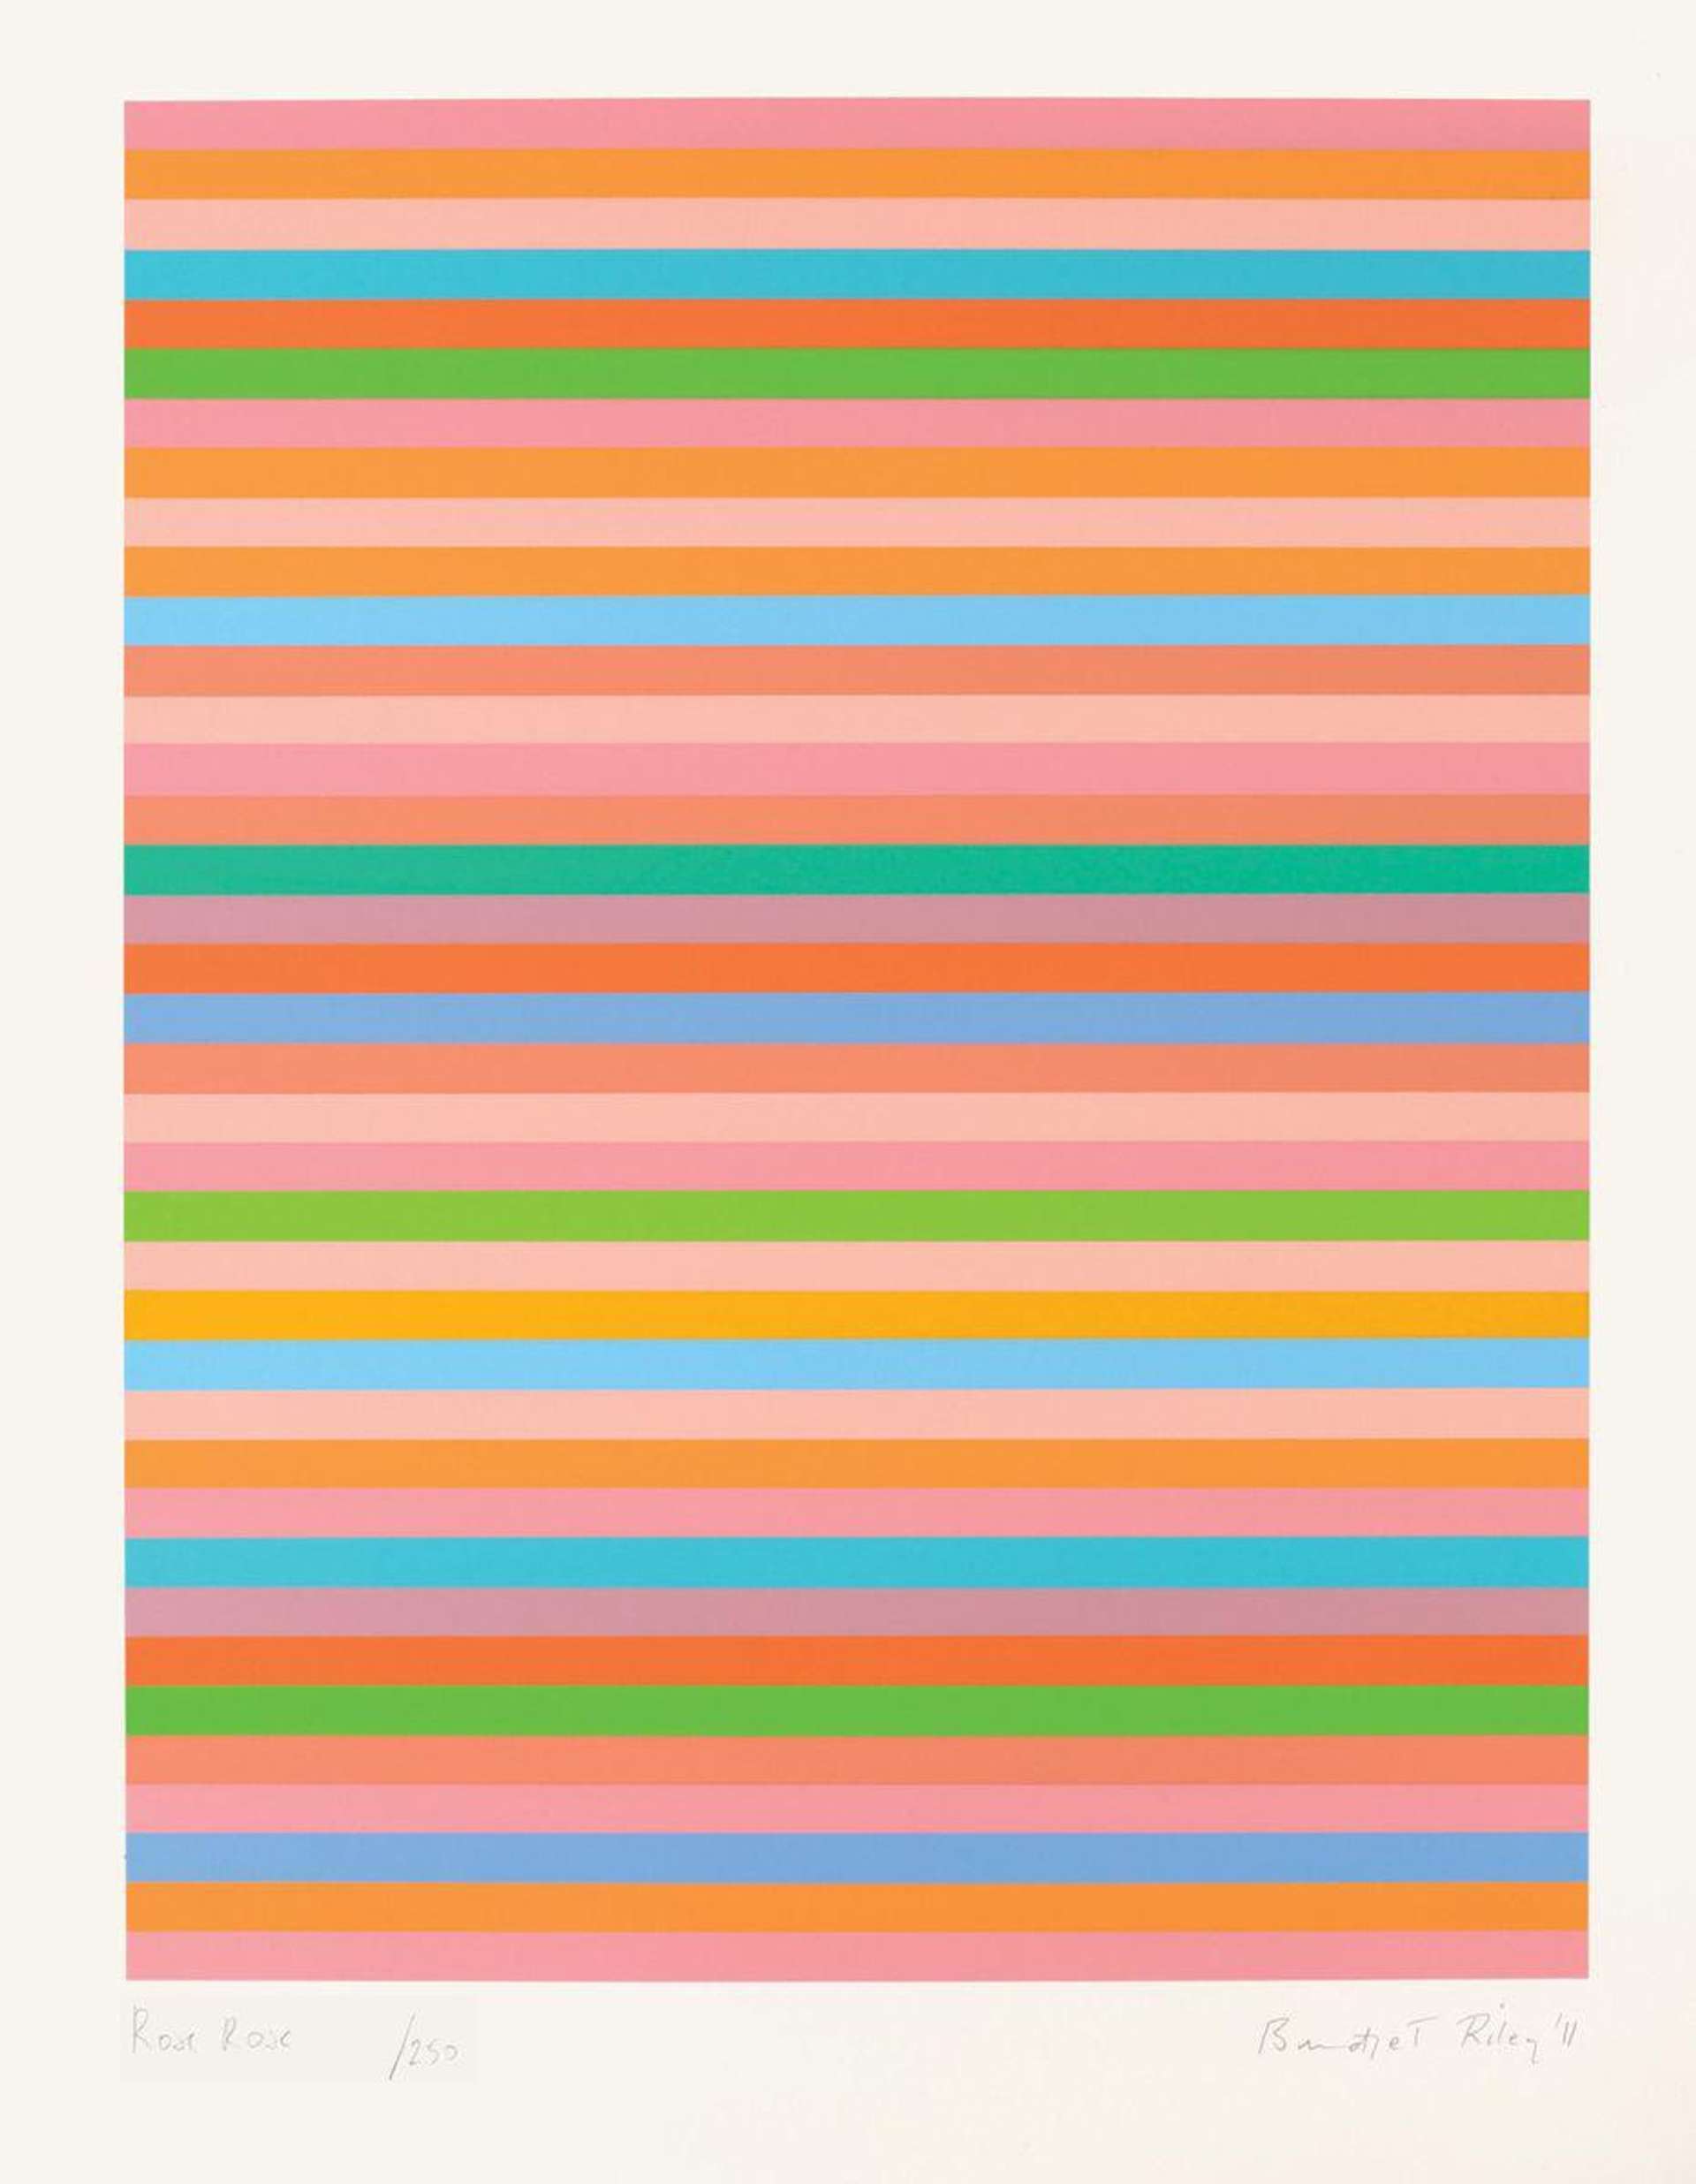 Bridget Riley’s Rose Rose. Multicoloured horizontal stripes stacked on top of one another forming the shape of a square. 